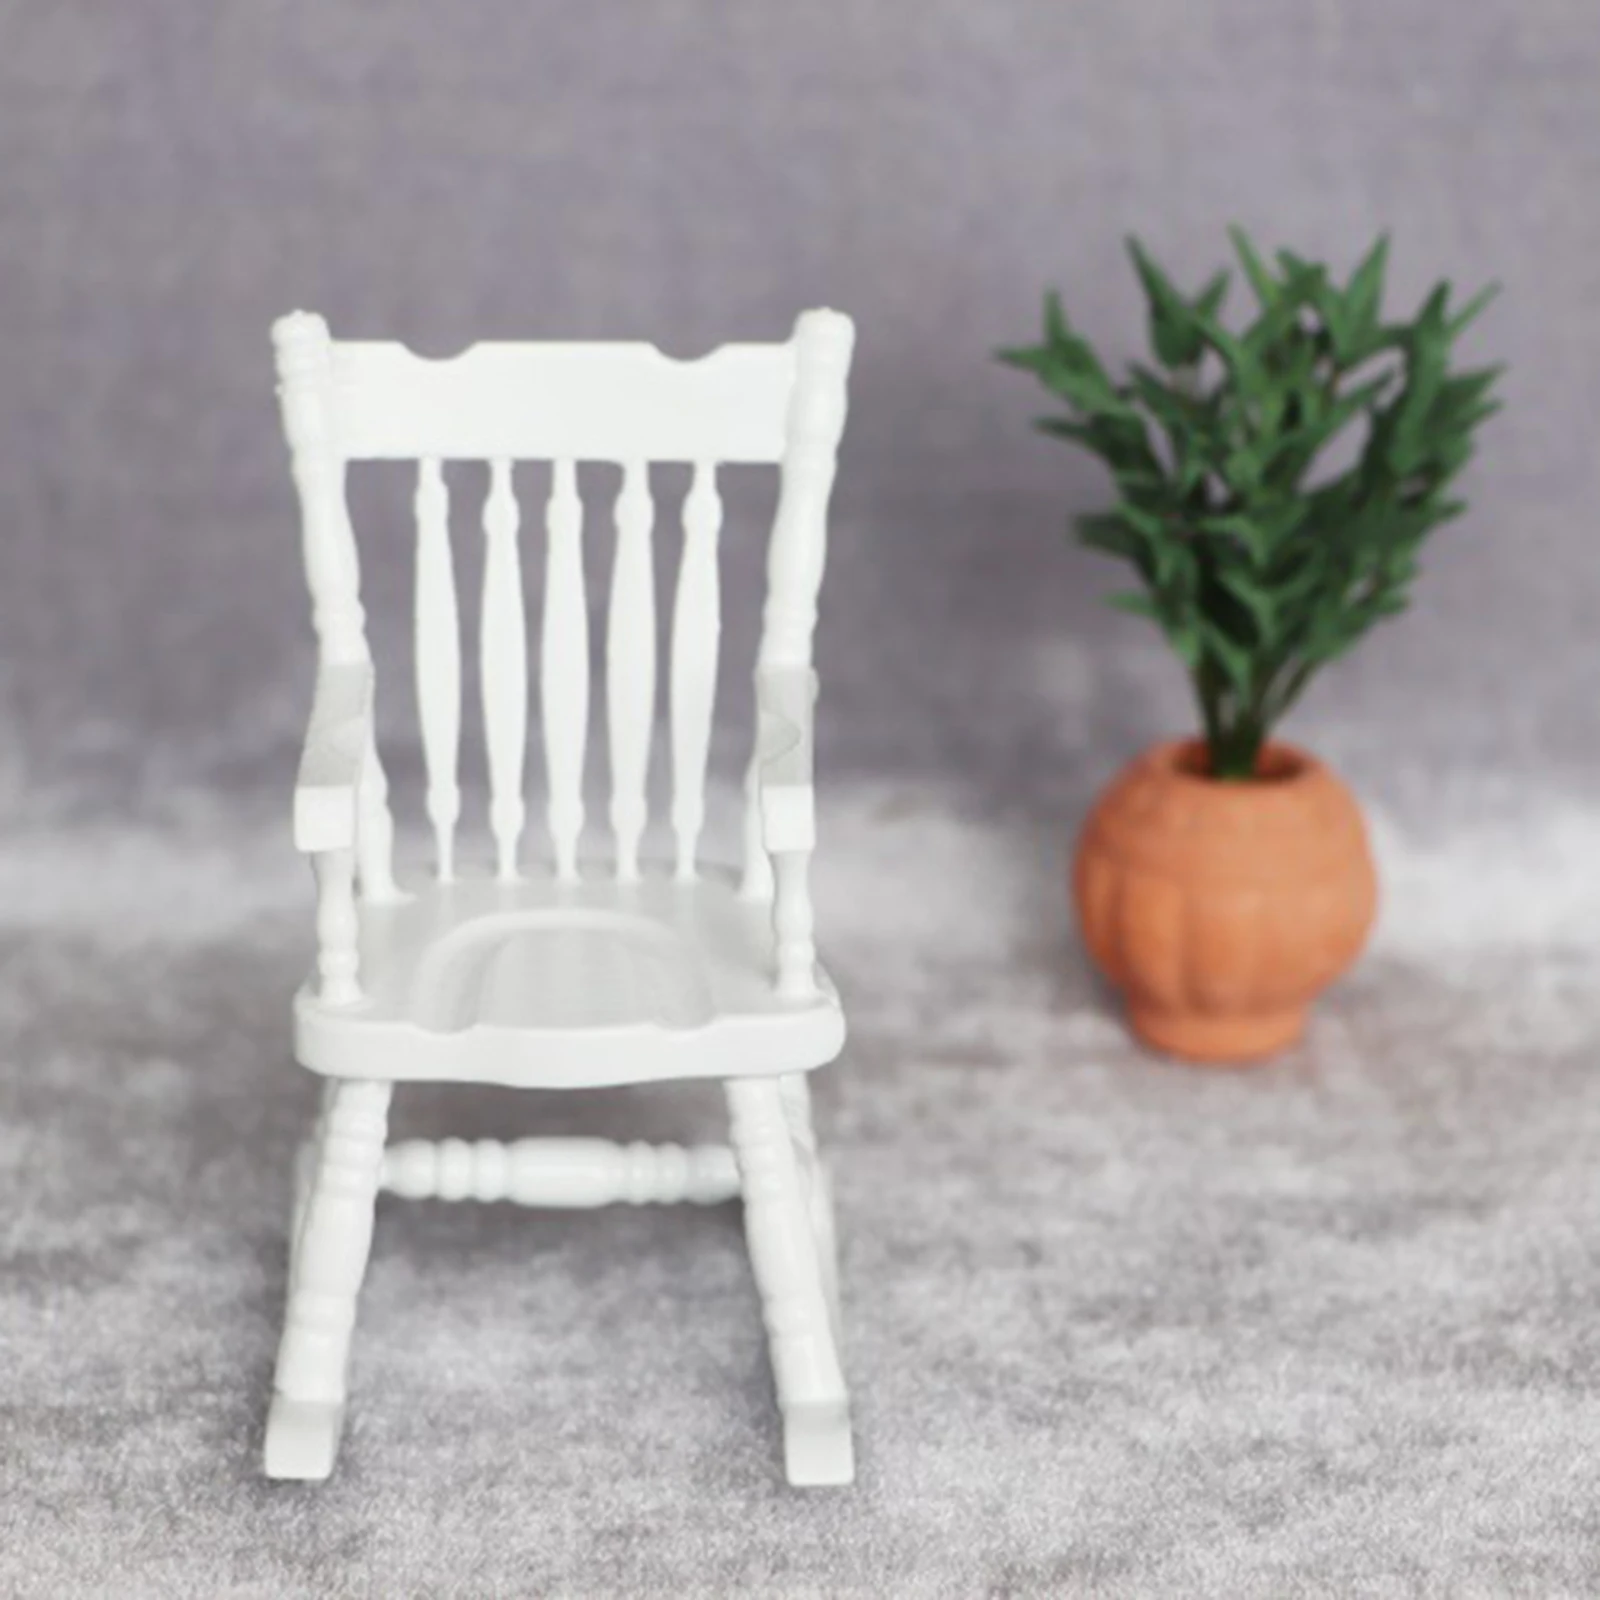 1:12 Handcrafted Dollhouse Miniature Rocking Chairs Doll House Furniture